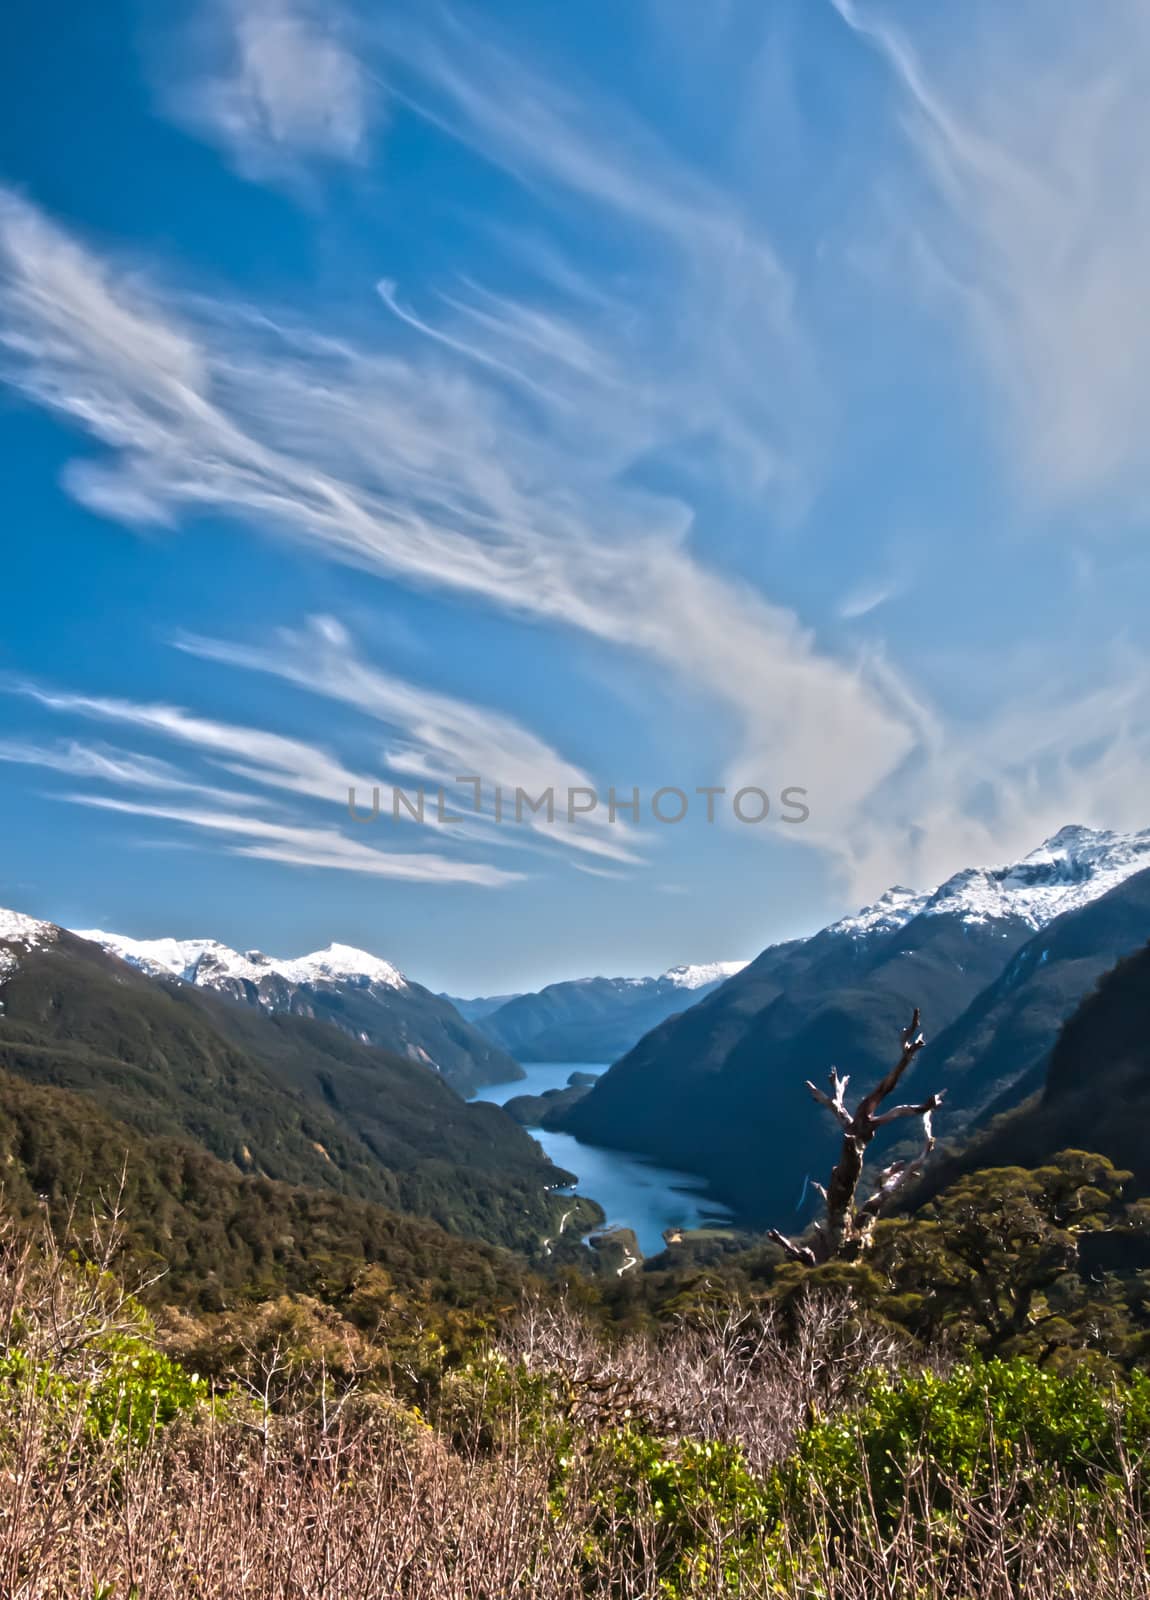 Viewpoint looking in the Doubtful Sound Valley in New Zealand.